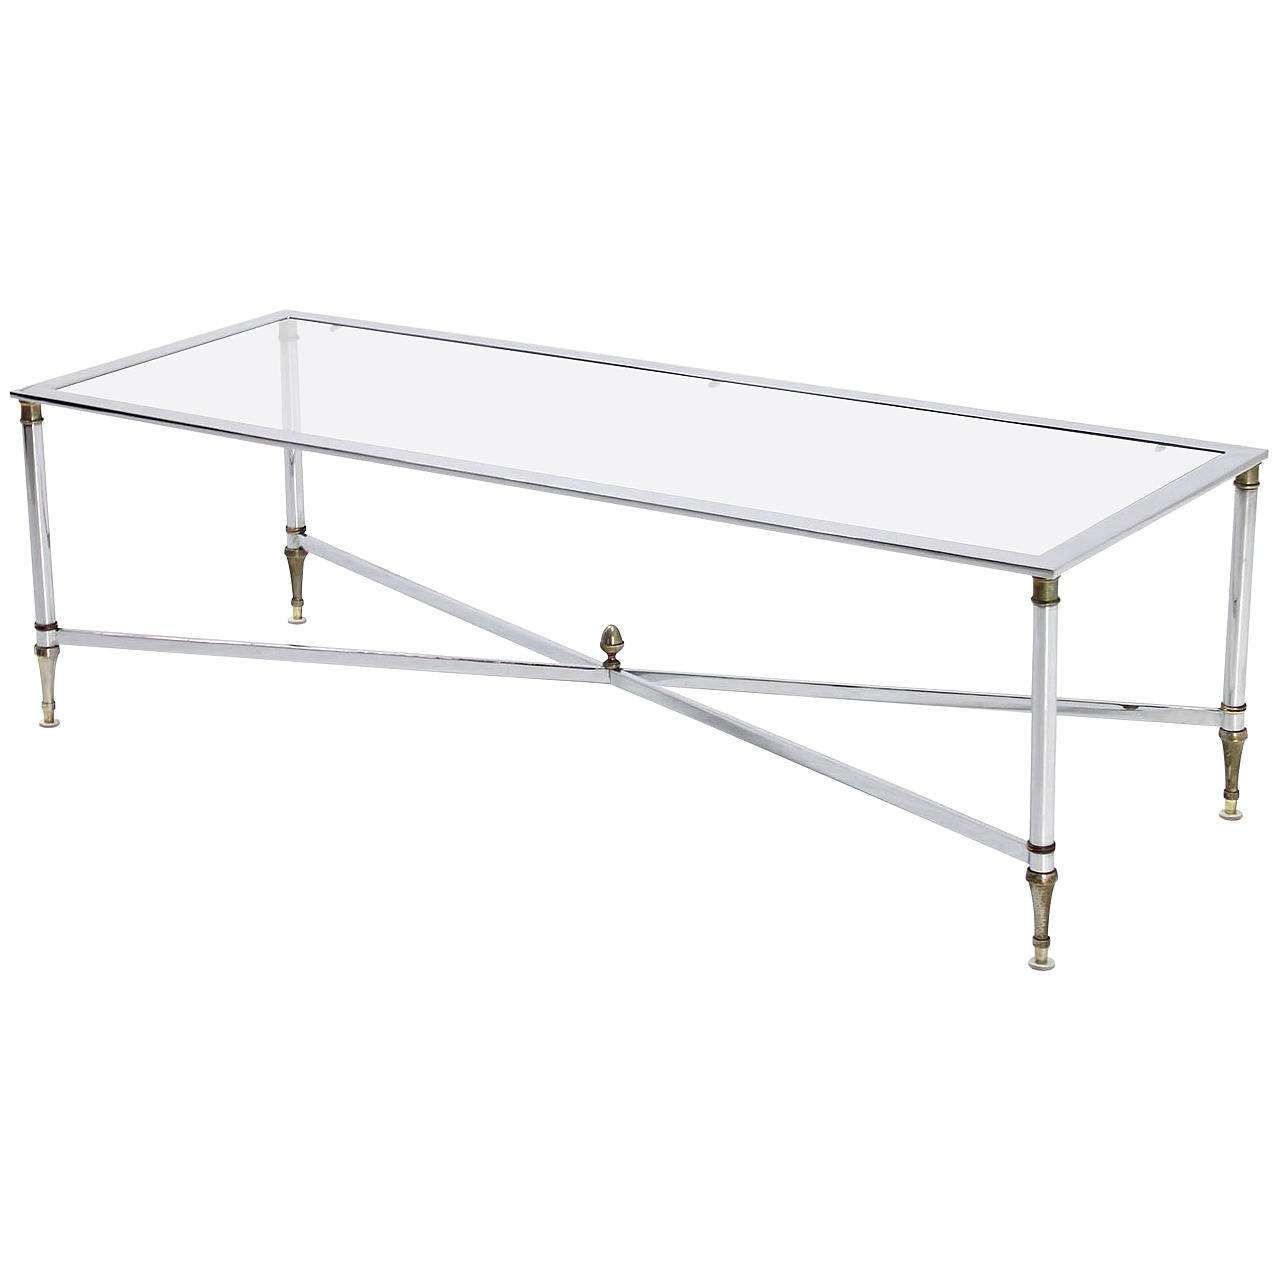 Chrome Brass X Base Glass Top Long Rectangle Coffee Table For Sale Throughout Preferred Chrome Glass Coffee Tables (View 2 of 20)